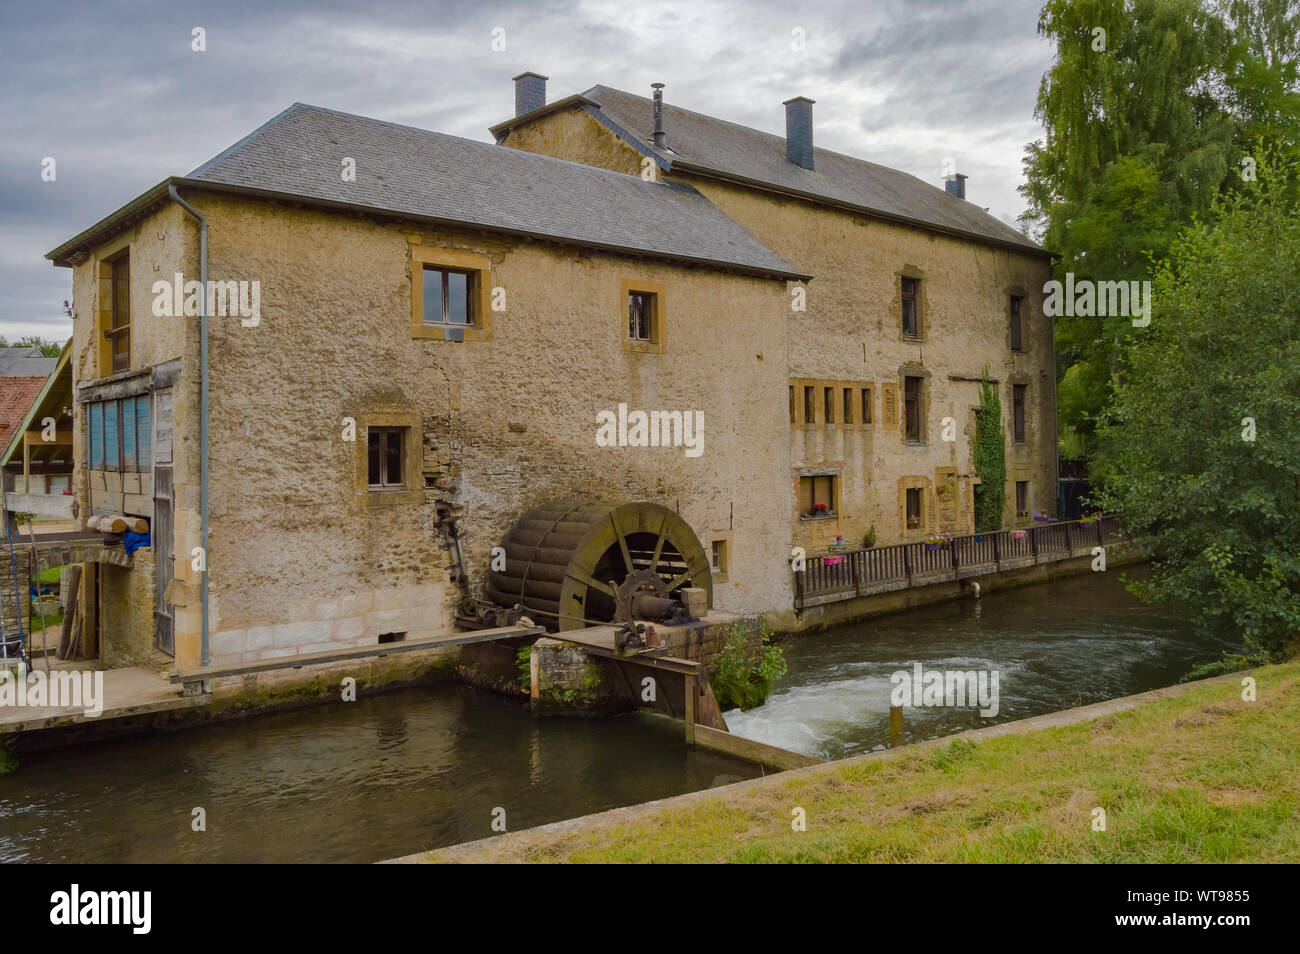 Old water mill on the tuna river running through the city of Virton eprovince du Luxembourg in Belgium Stock Photo